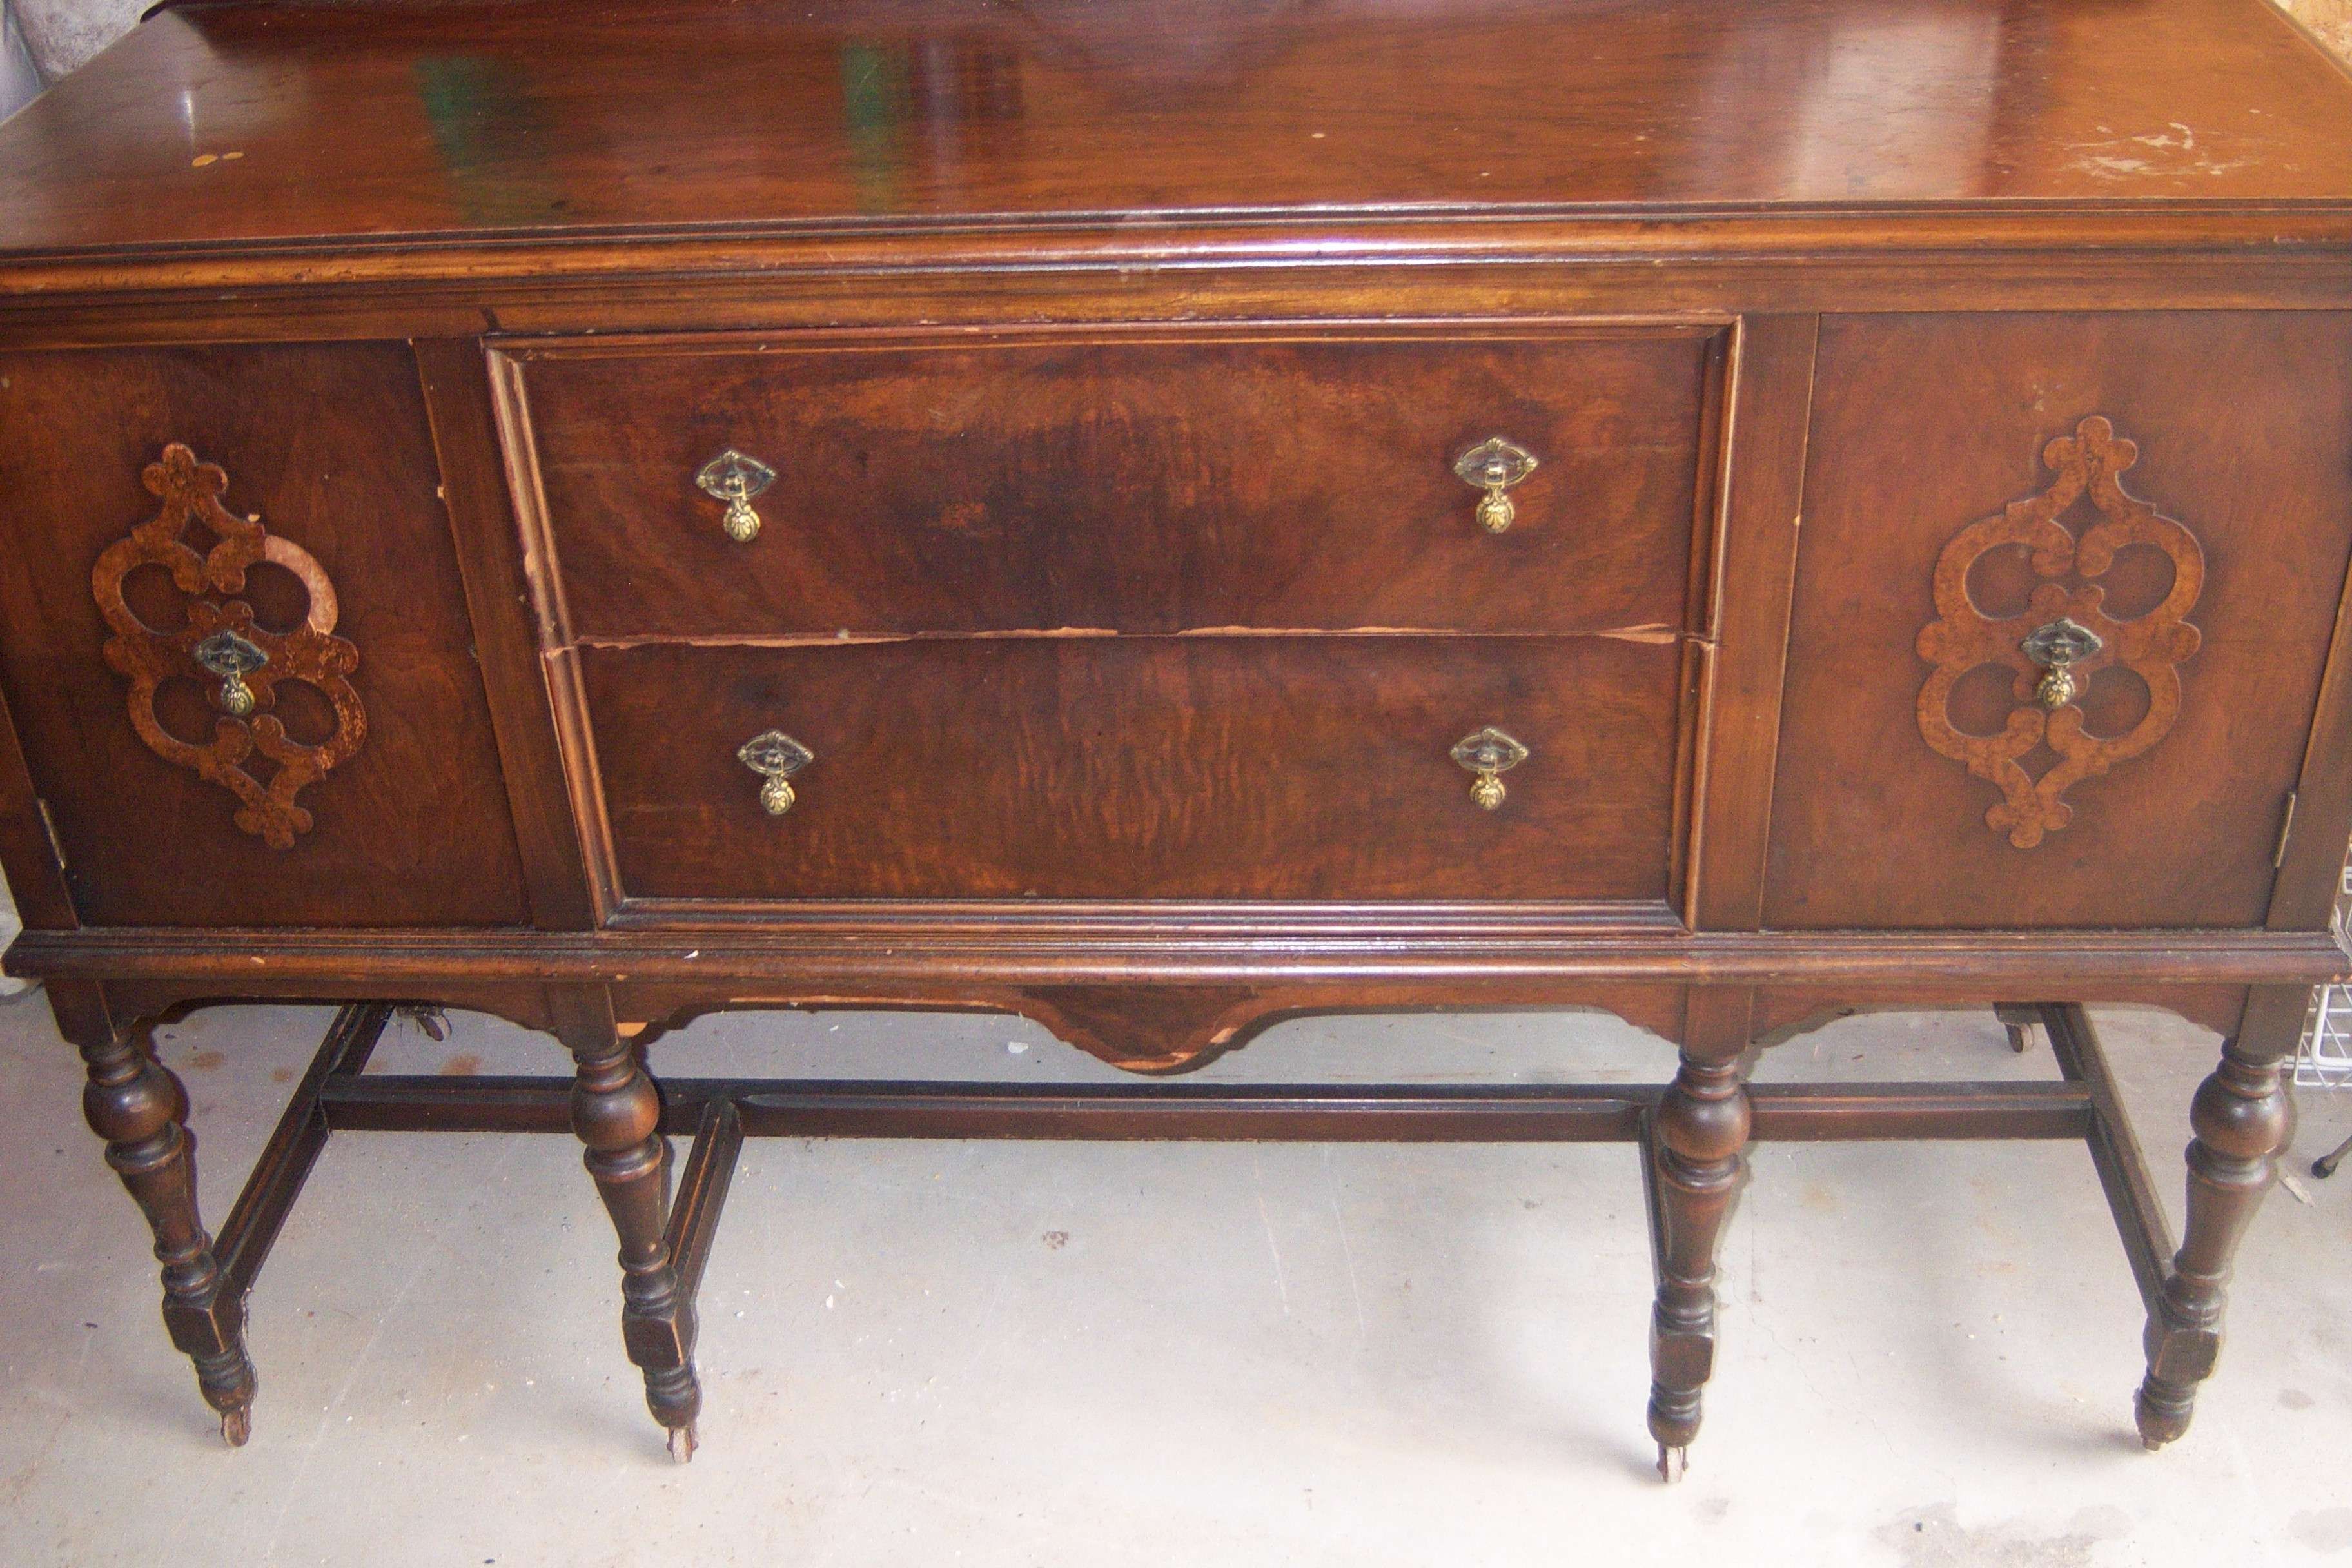 Beautiful Antique Sideboards And Buffets – Bjdgjy Throughout Wooden Sideboards And Buffets (Gallery 19 of 20)